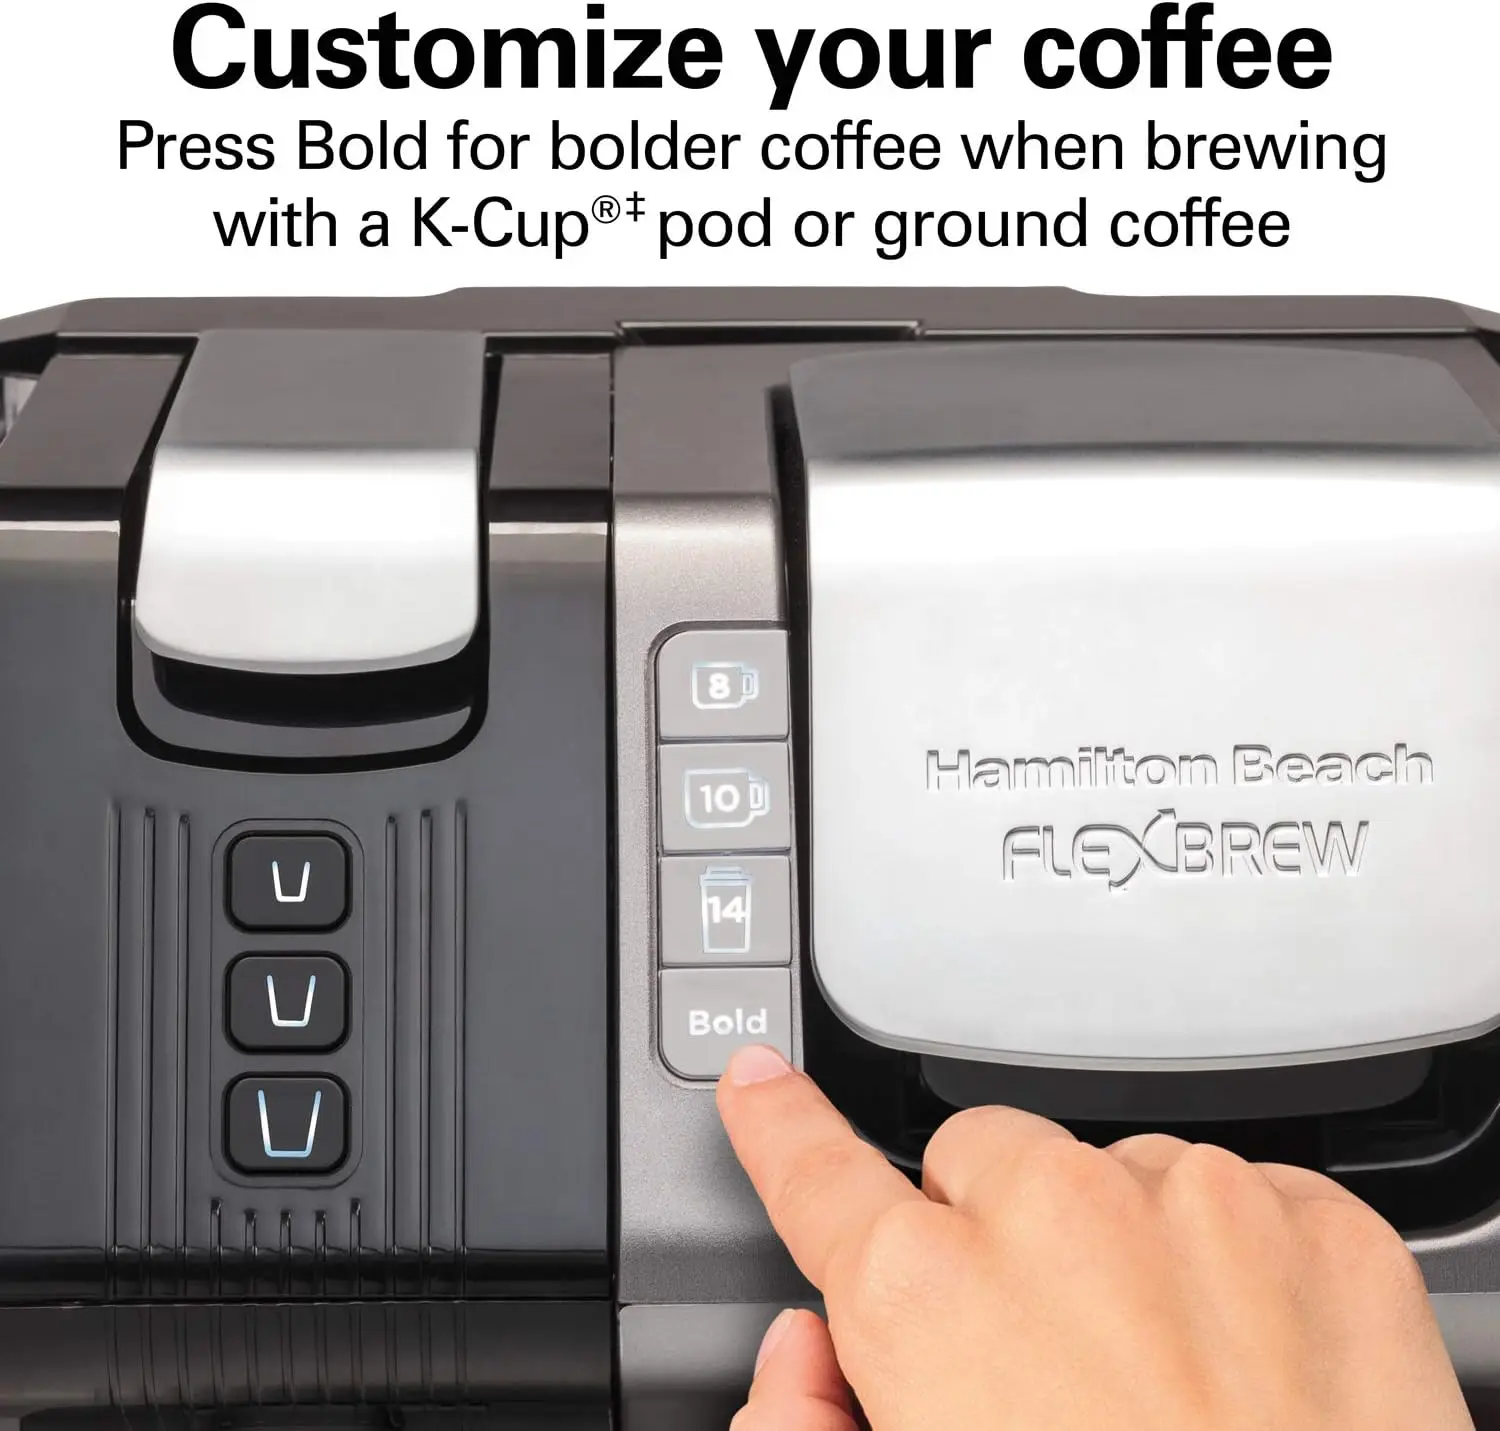 https://ae01.alicdn.com/kf/Sd477fa70235e4871af17f9282e76ec25D/Trio-2-Way-Coffee-Maker-Compatible-with-K-Cup-Pods-or-Grounds-Combo-Single-Serve-Espresso.jpg